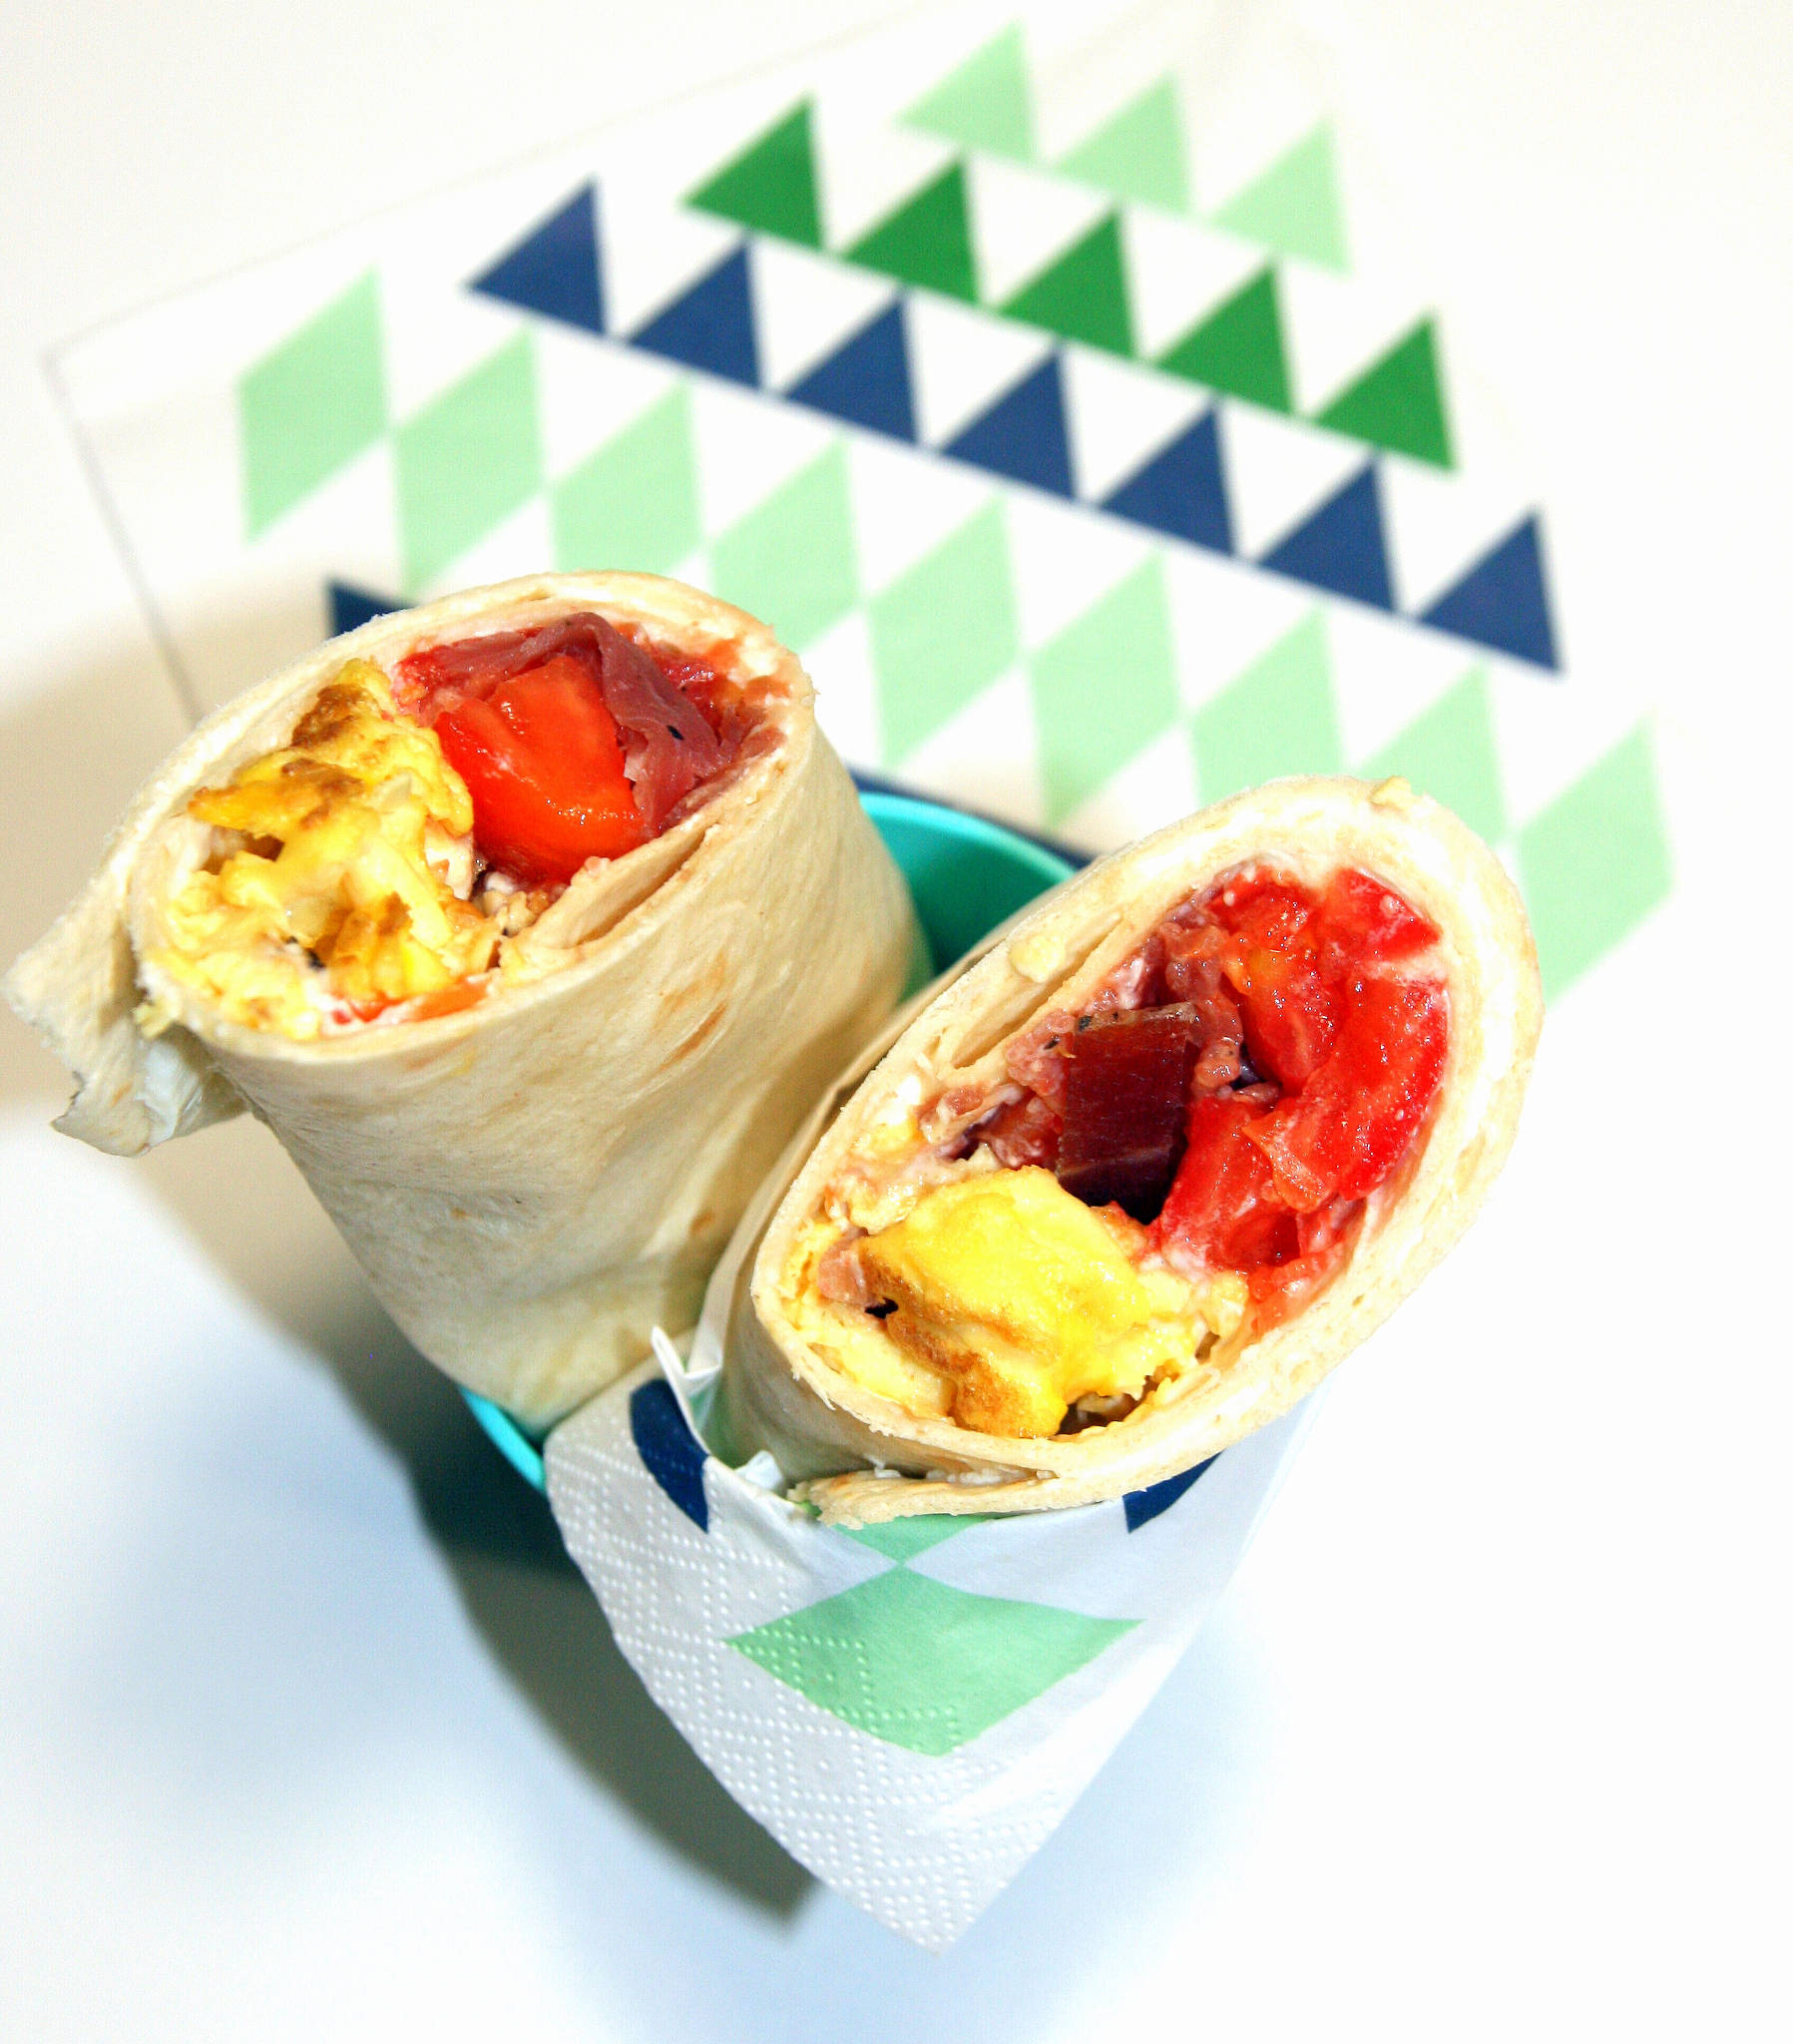 Wrap omelette, bacon, tomate, sauce fromage frais